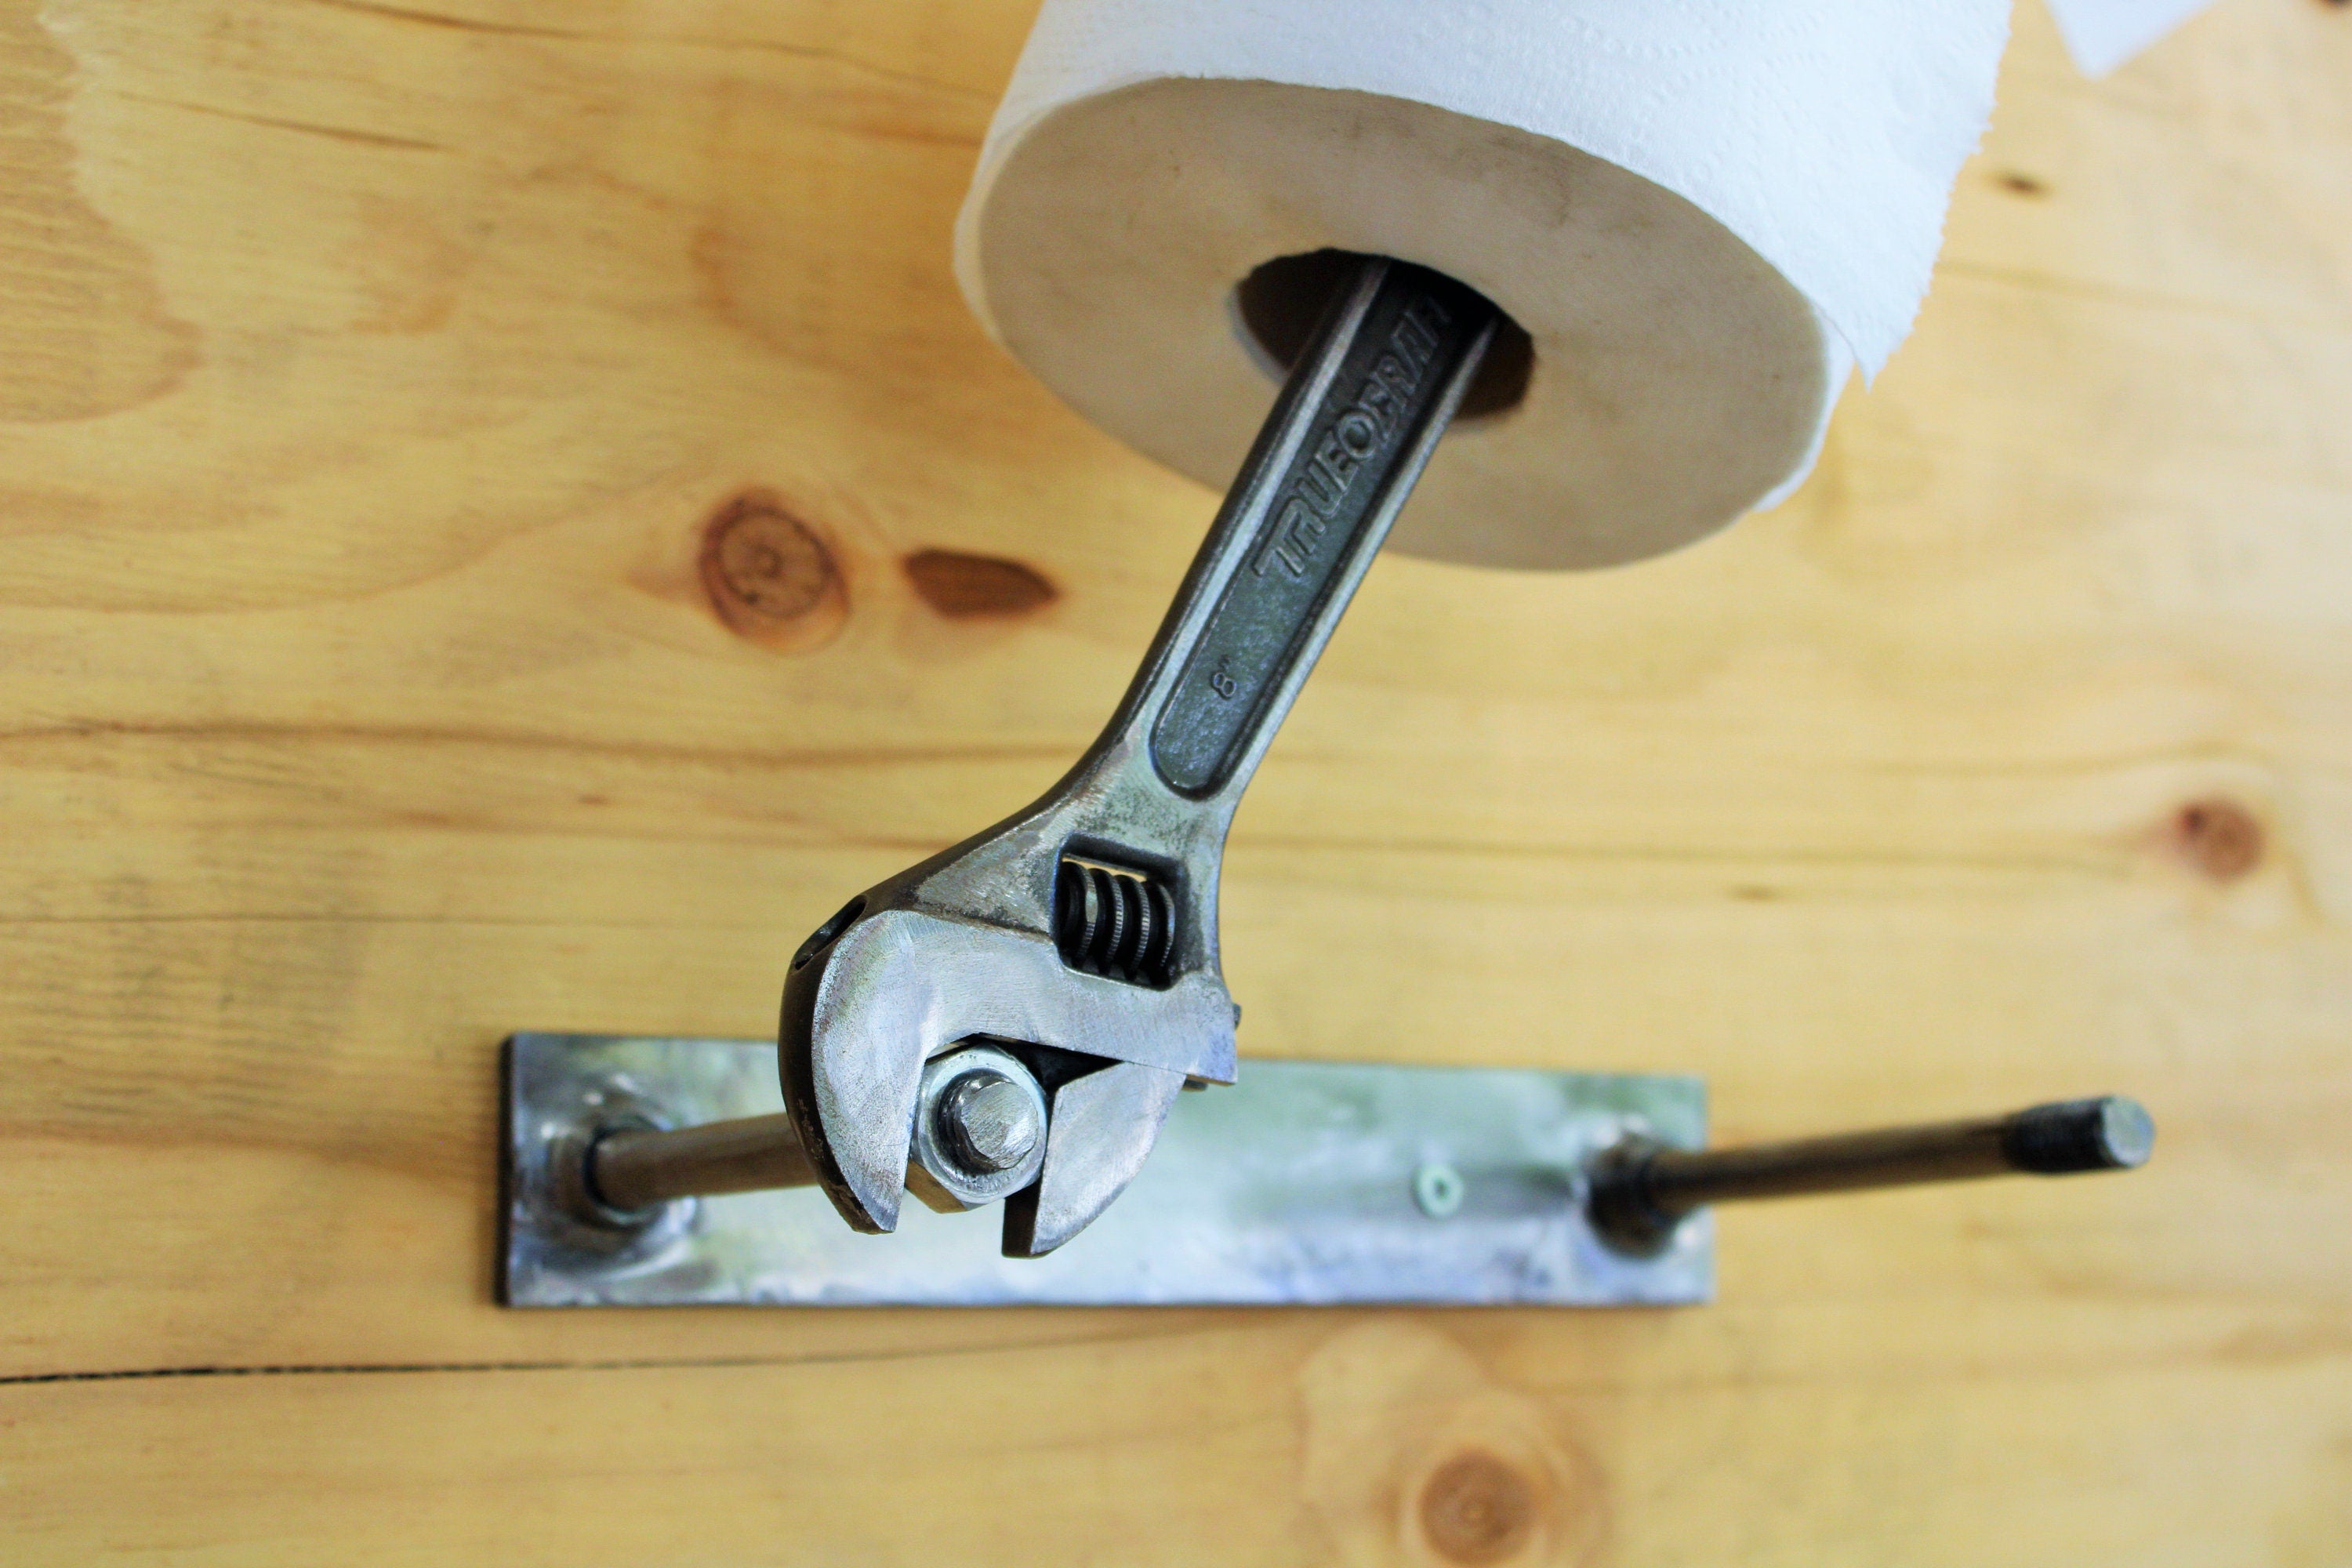 Wrench and nut toilet paper holder being turned to change its toilet paper roll.